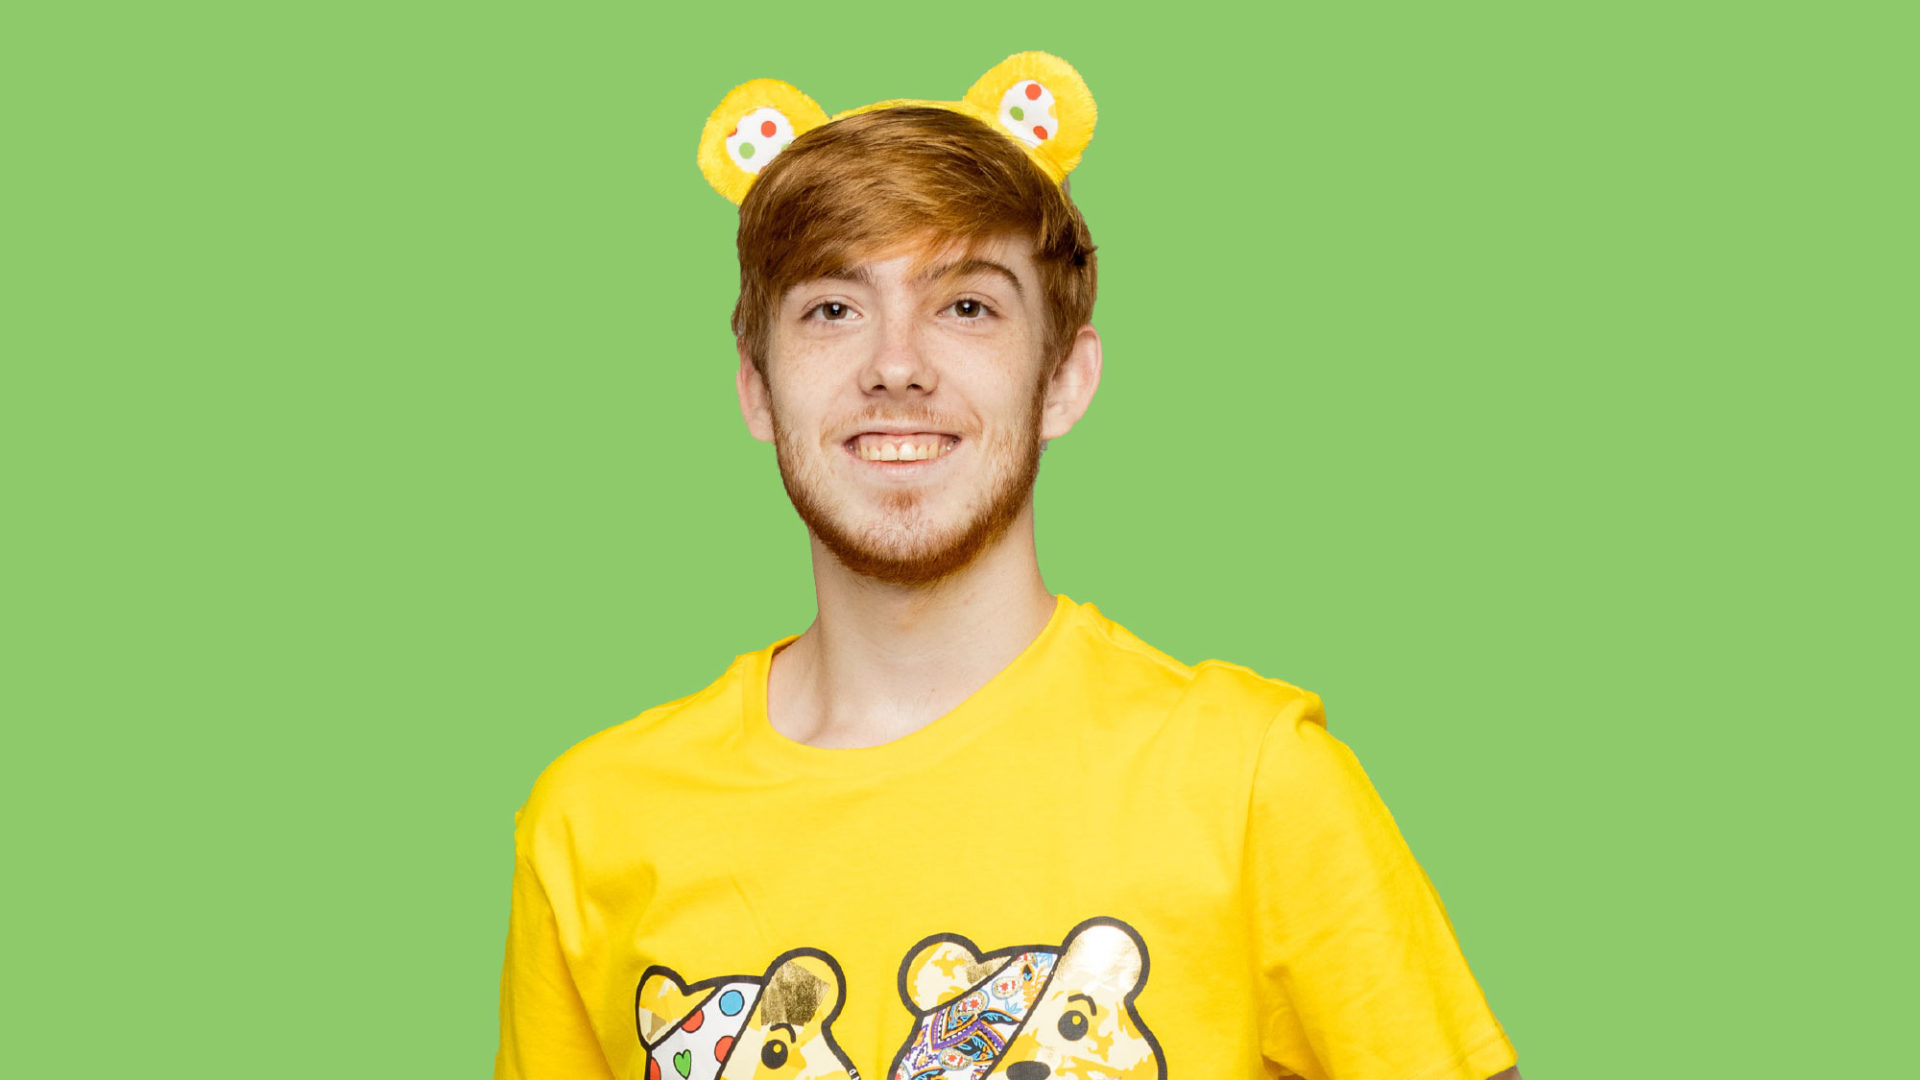 Joe holding a pudsey bear toy and wearing pudsey ears